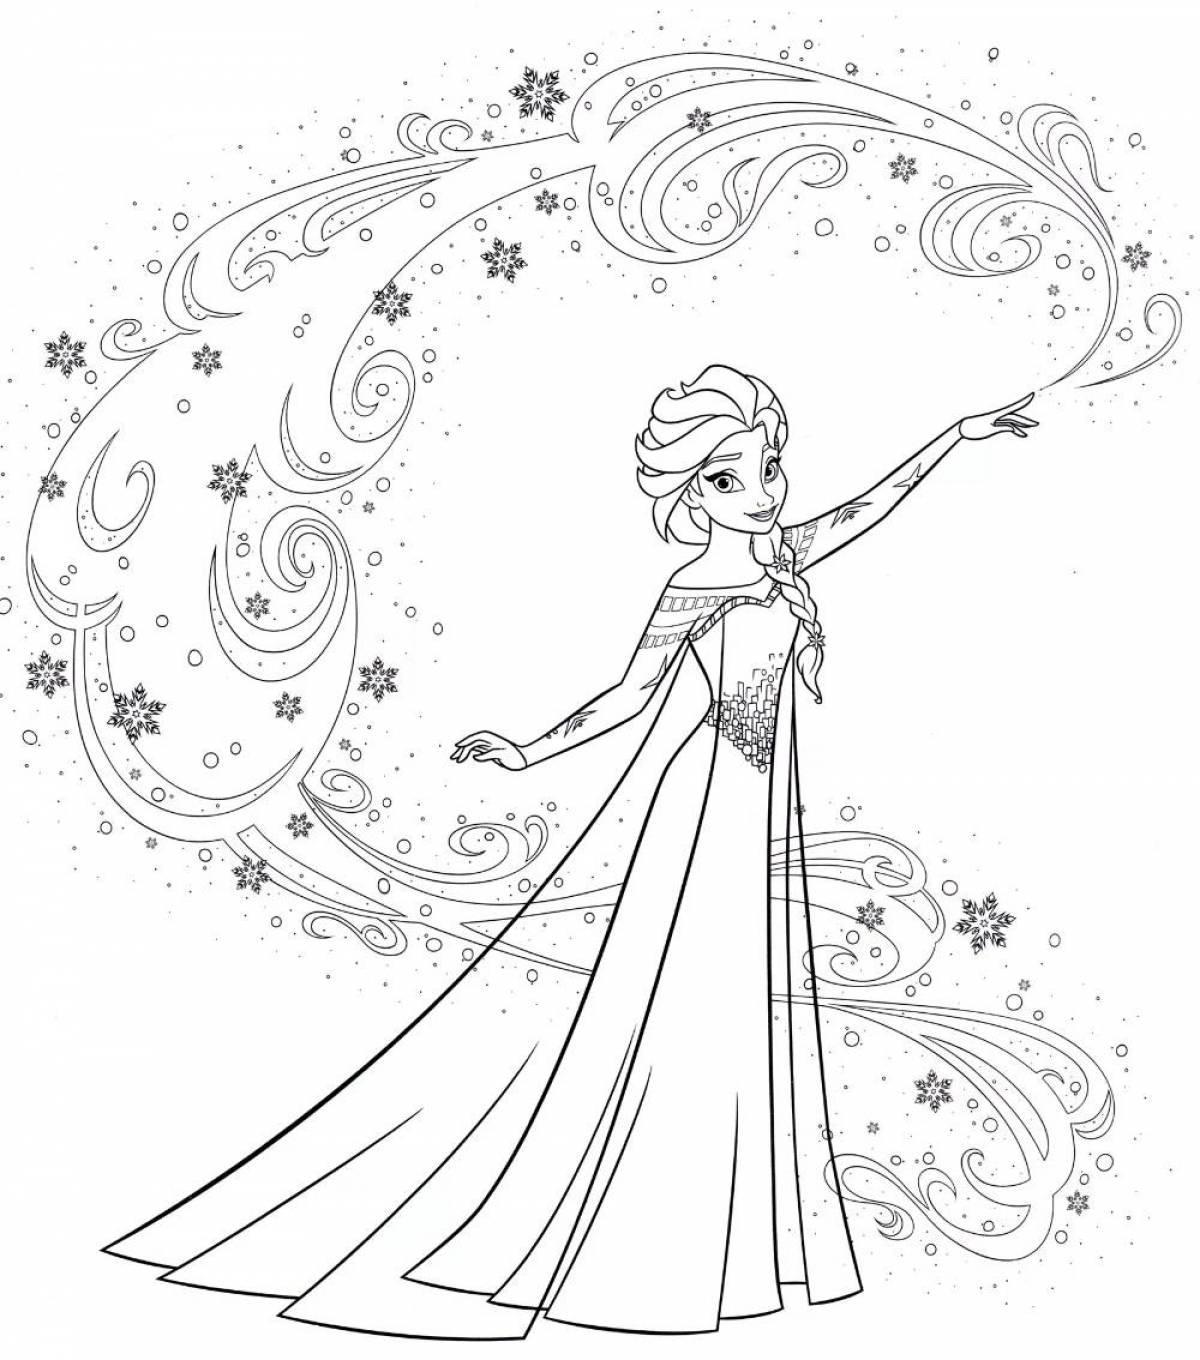 Exotic elsa and anna coloring book for kids